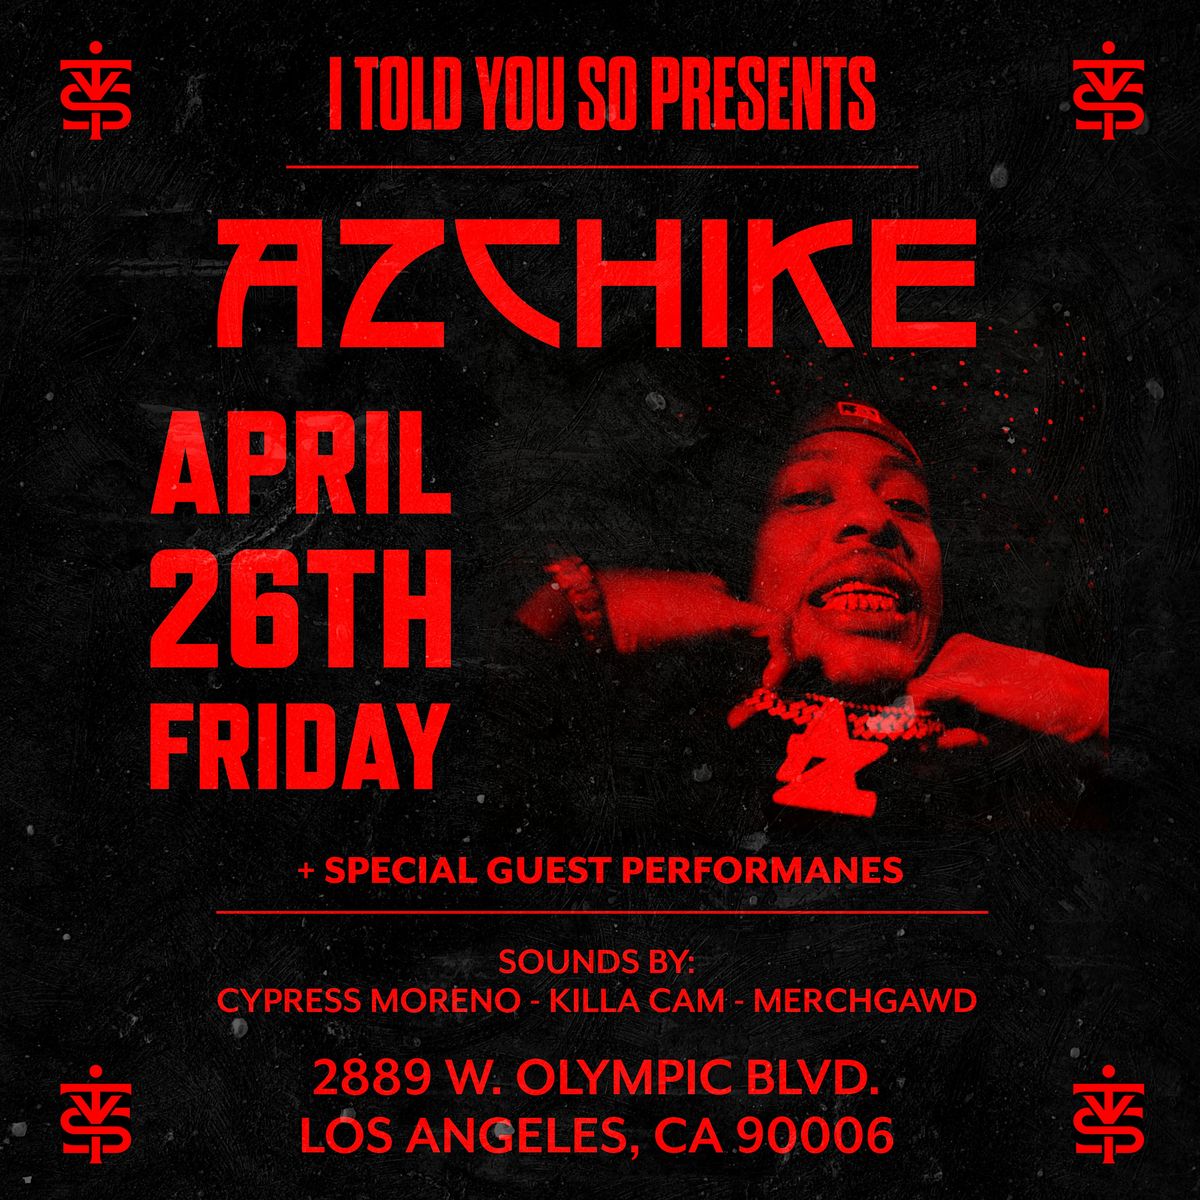 AZCHIKE TOLD YOU SO! [LIVE PERFORMANCE]